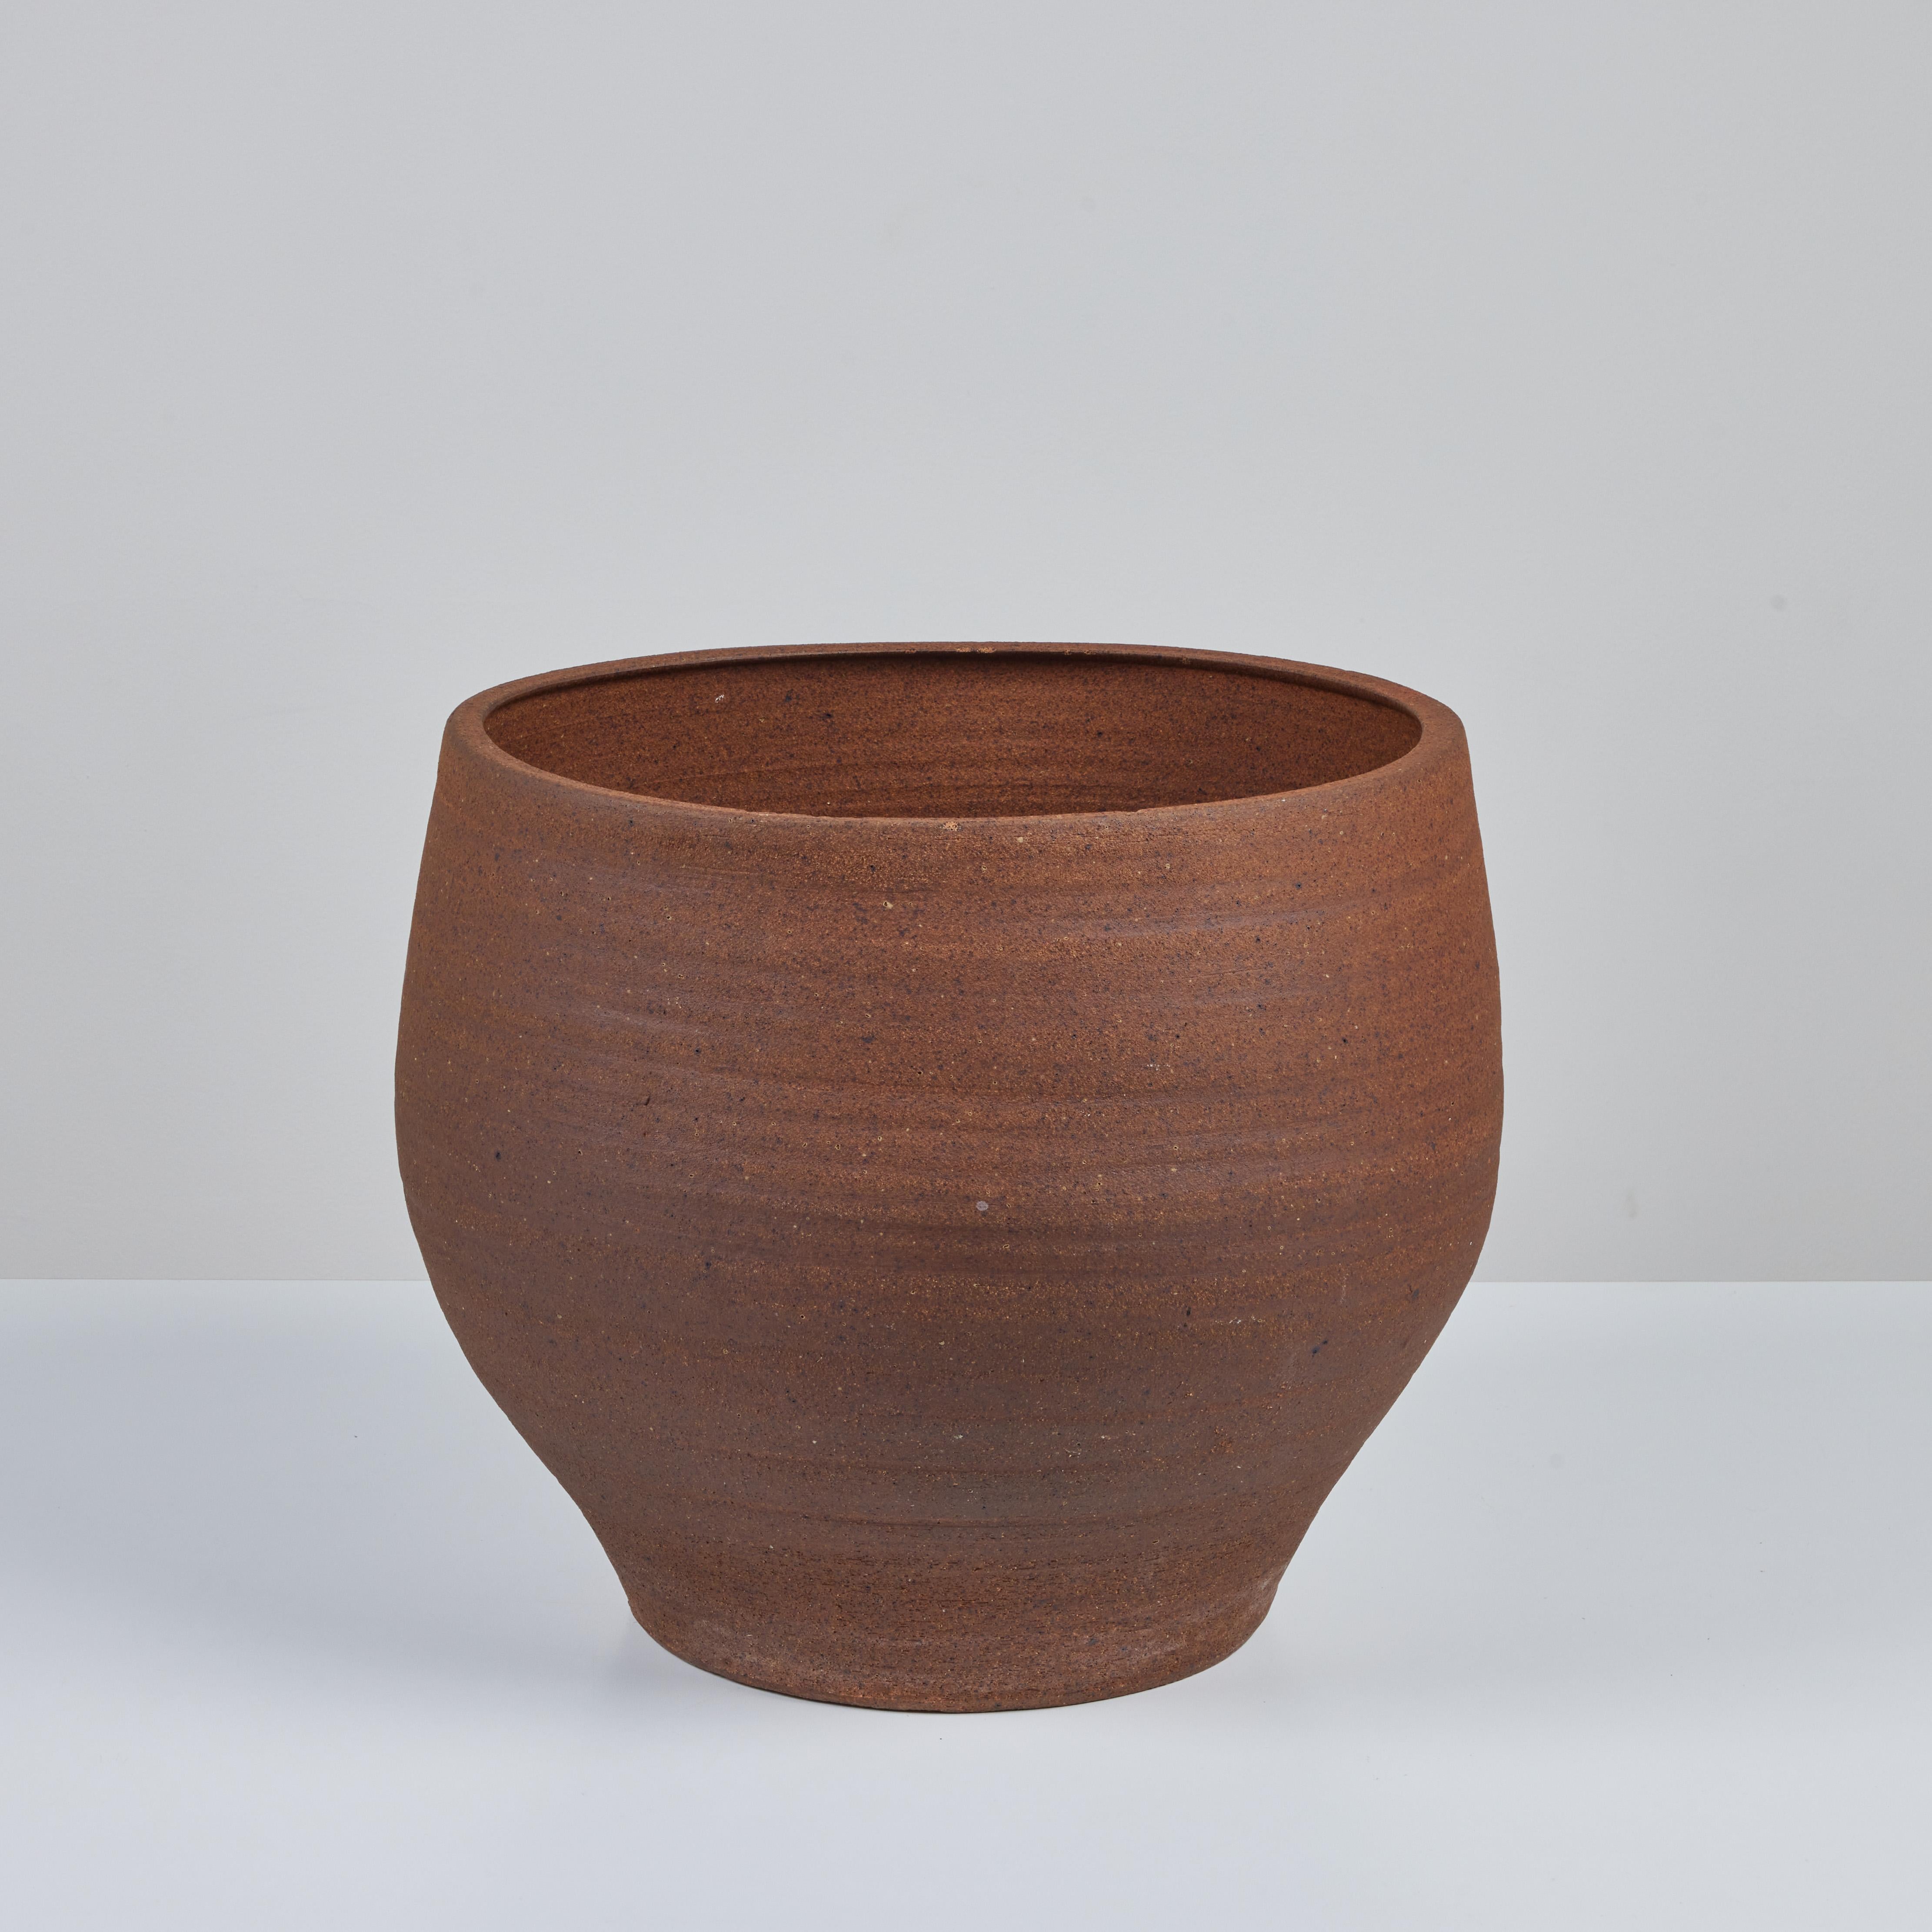 John Follis Hand Thrown Stoneware Bell Planter for Architectural Pottery In Good Condition For Sale In Los Angeles, CA